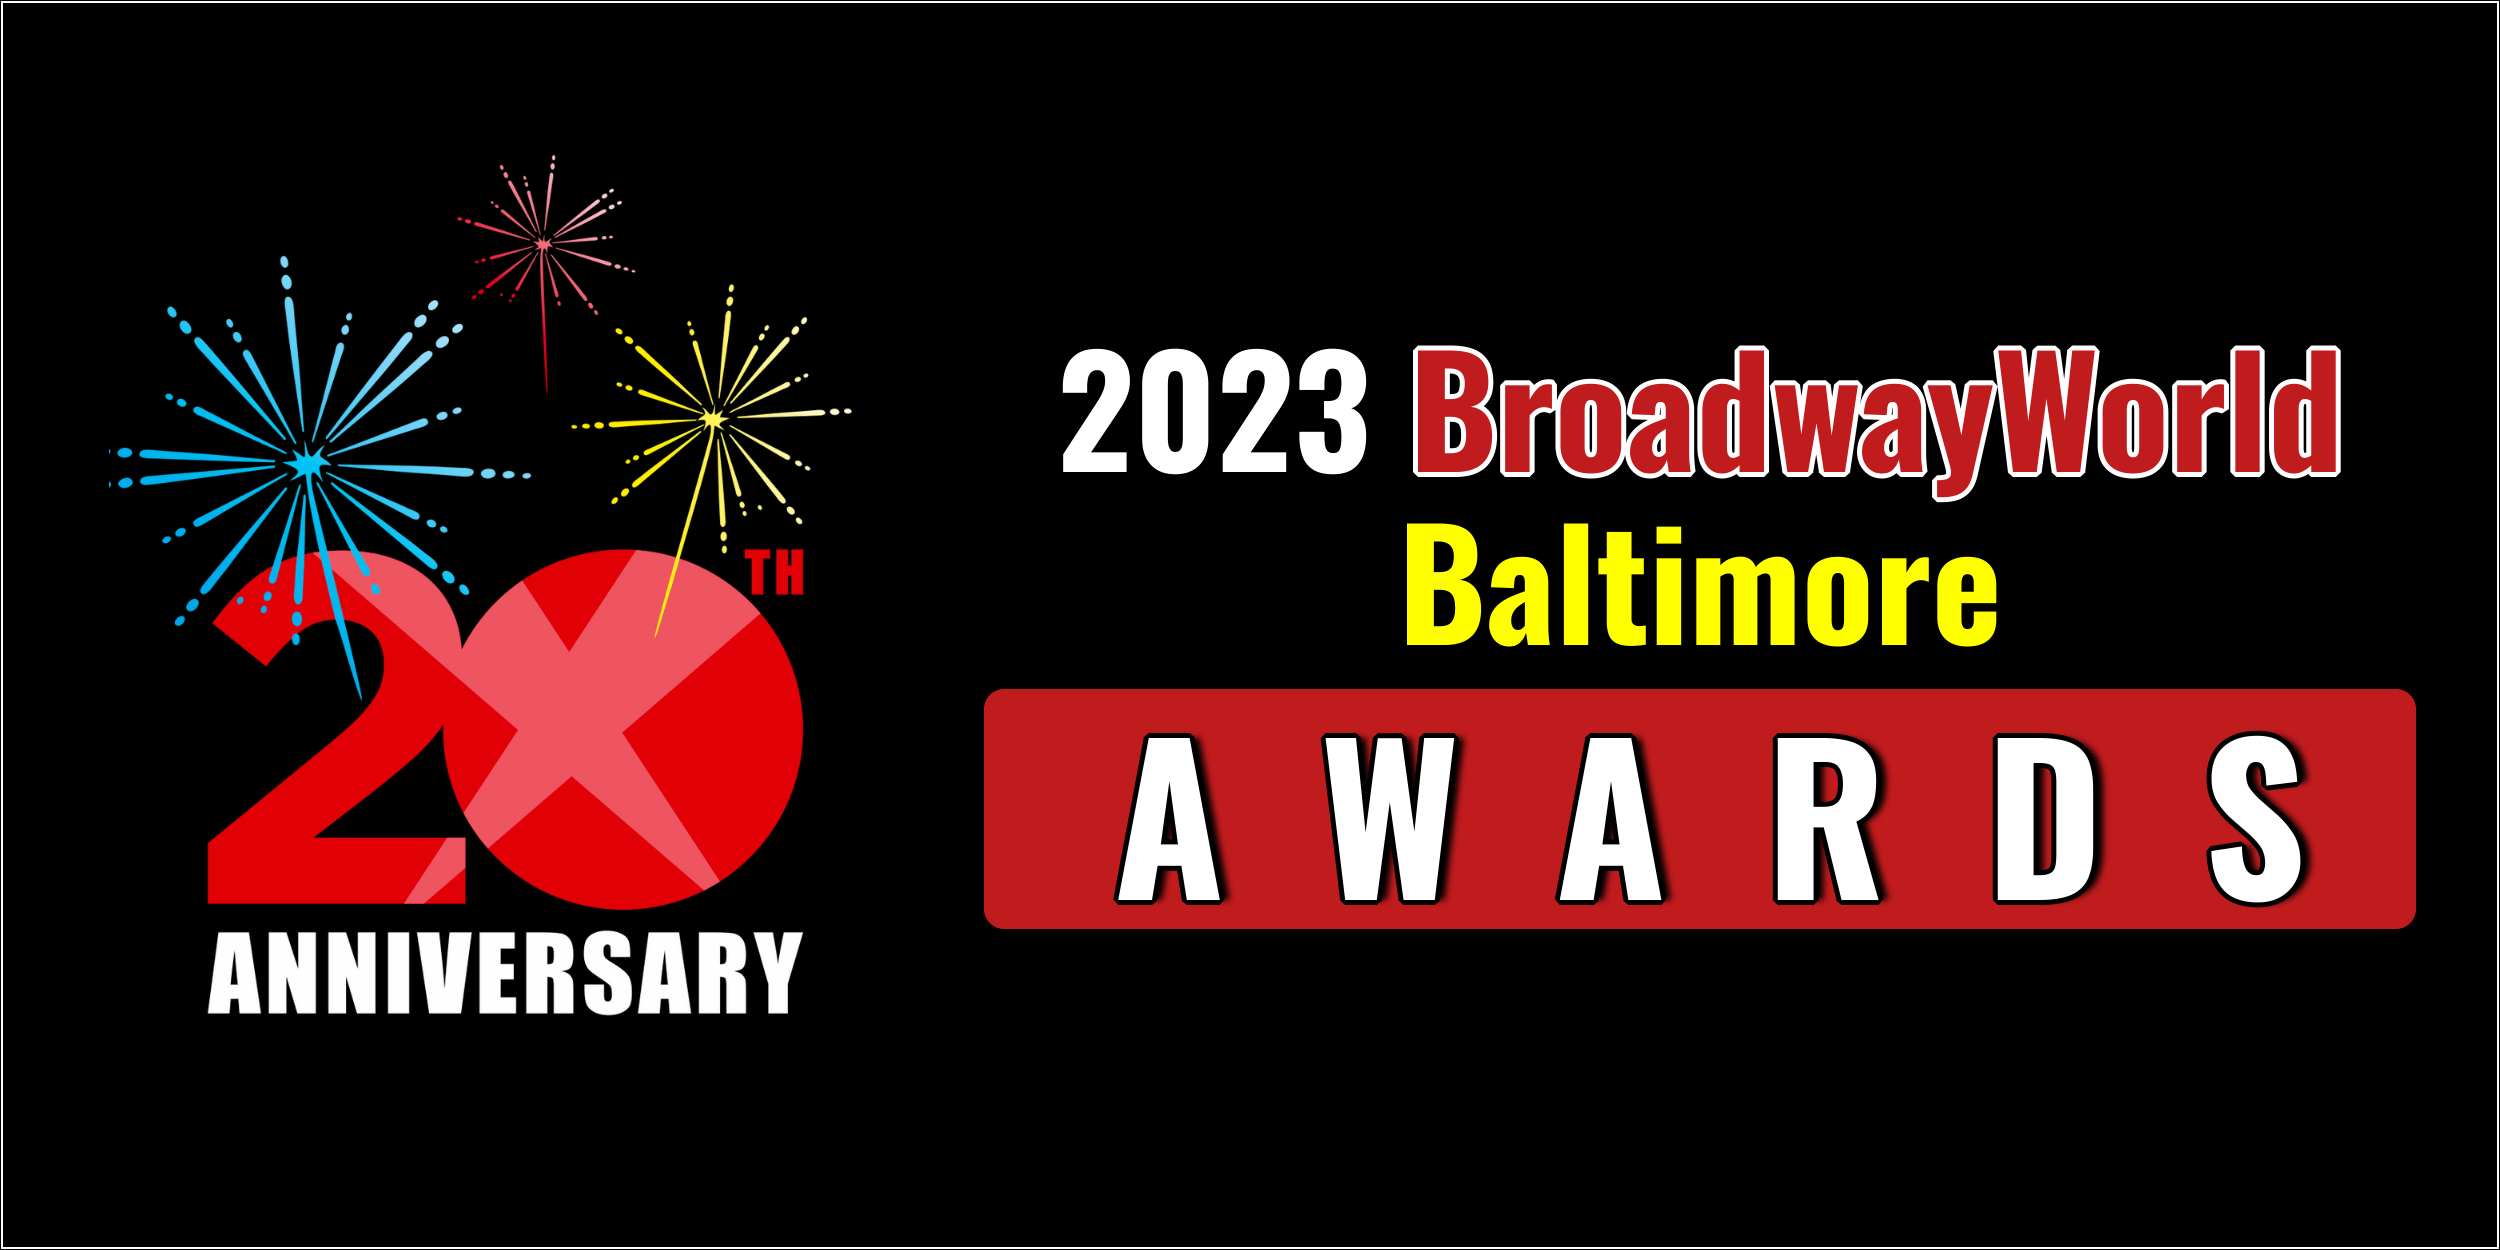 Latest Standings Announced For The 2023 BroadwayWorld Baltimore Awards; ROMEO AND JULIET Leads Best Play! 